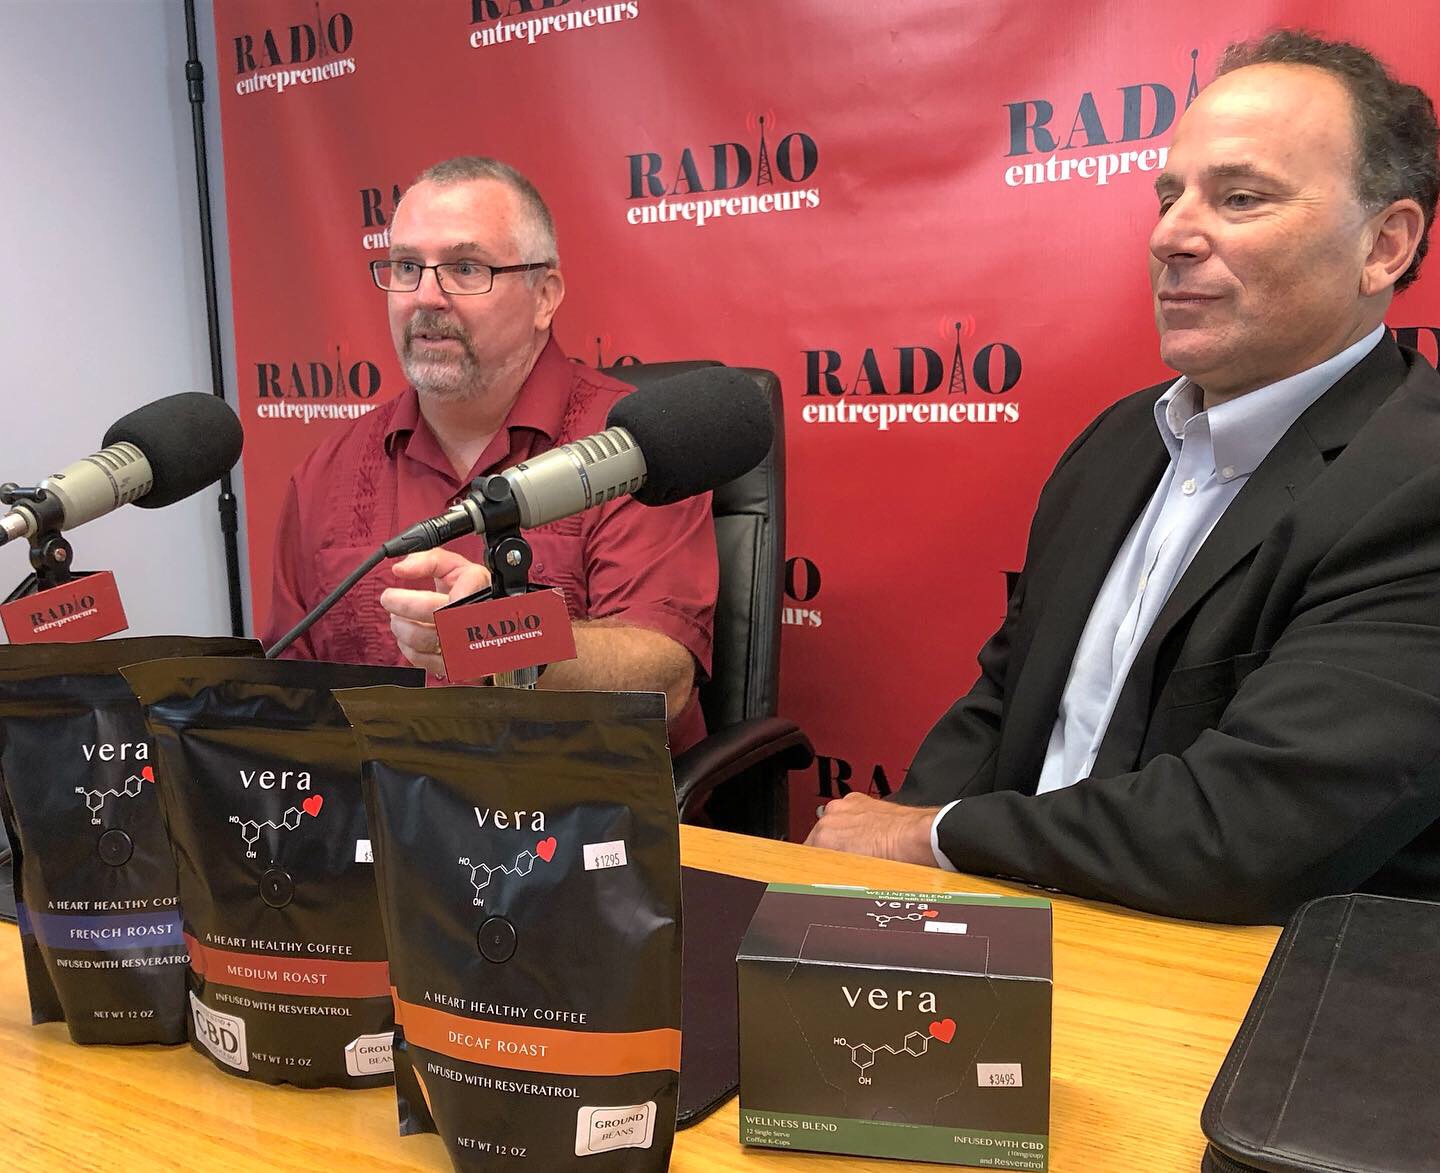 “The Health Benefits of Resveratrol In Your Morning Coffee” with Dr. Glen Miller & Tom Polcaro of Vera Roasting